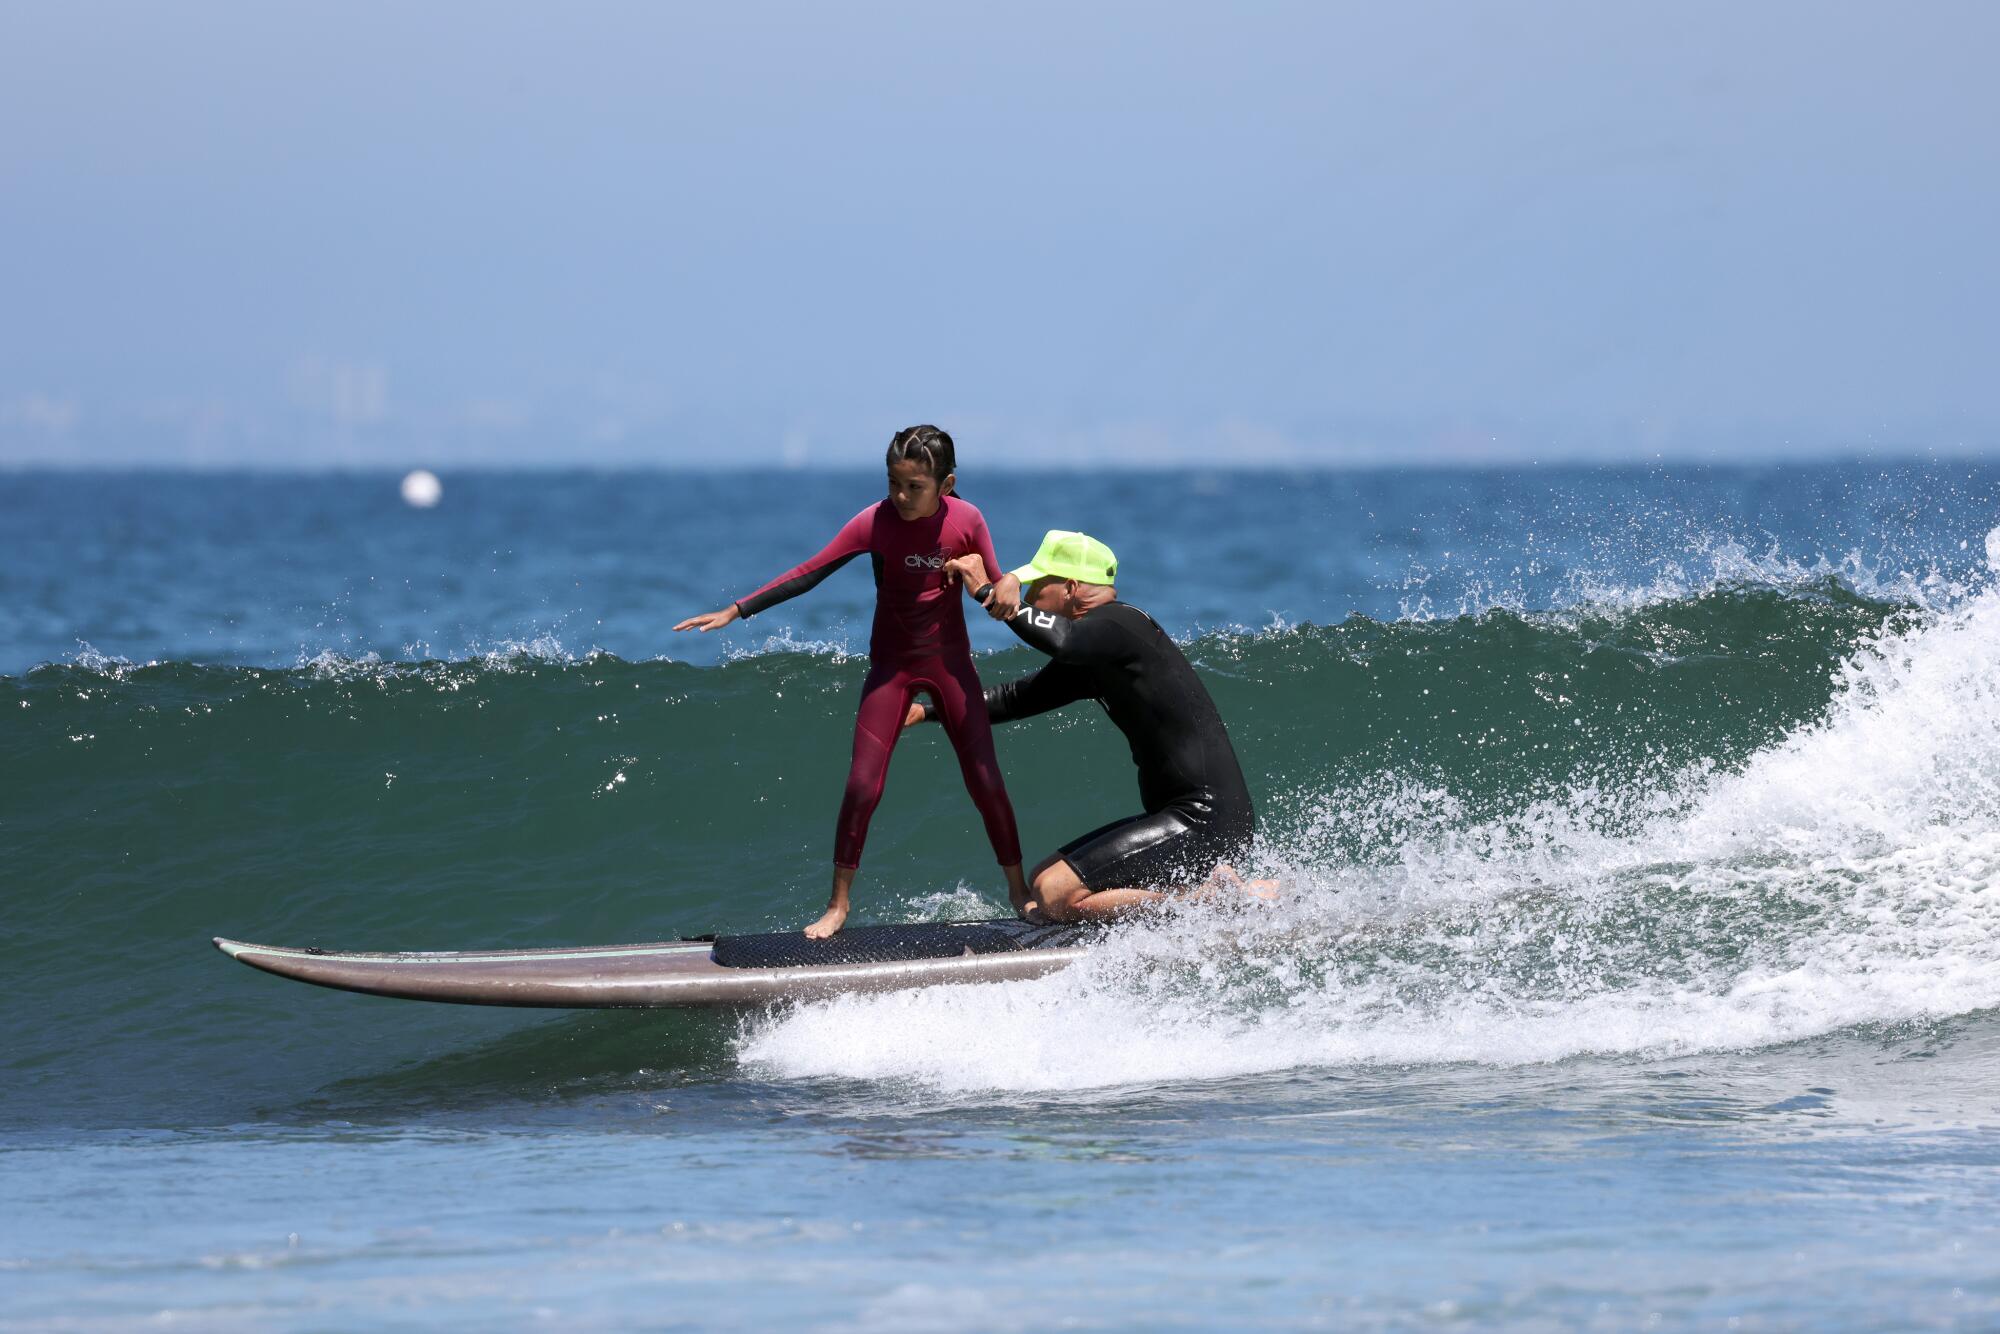 An adult kneels, steadying a young girl, as they ride on a surfboard.